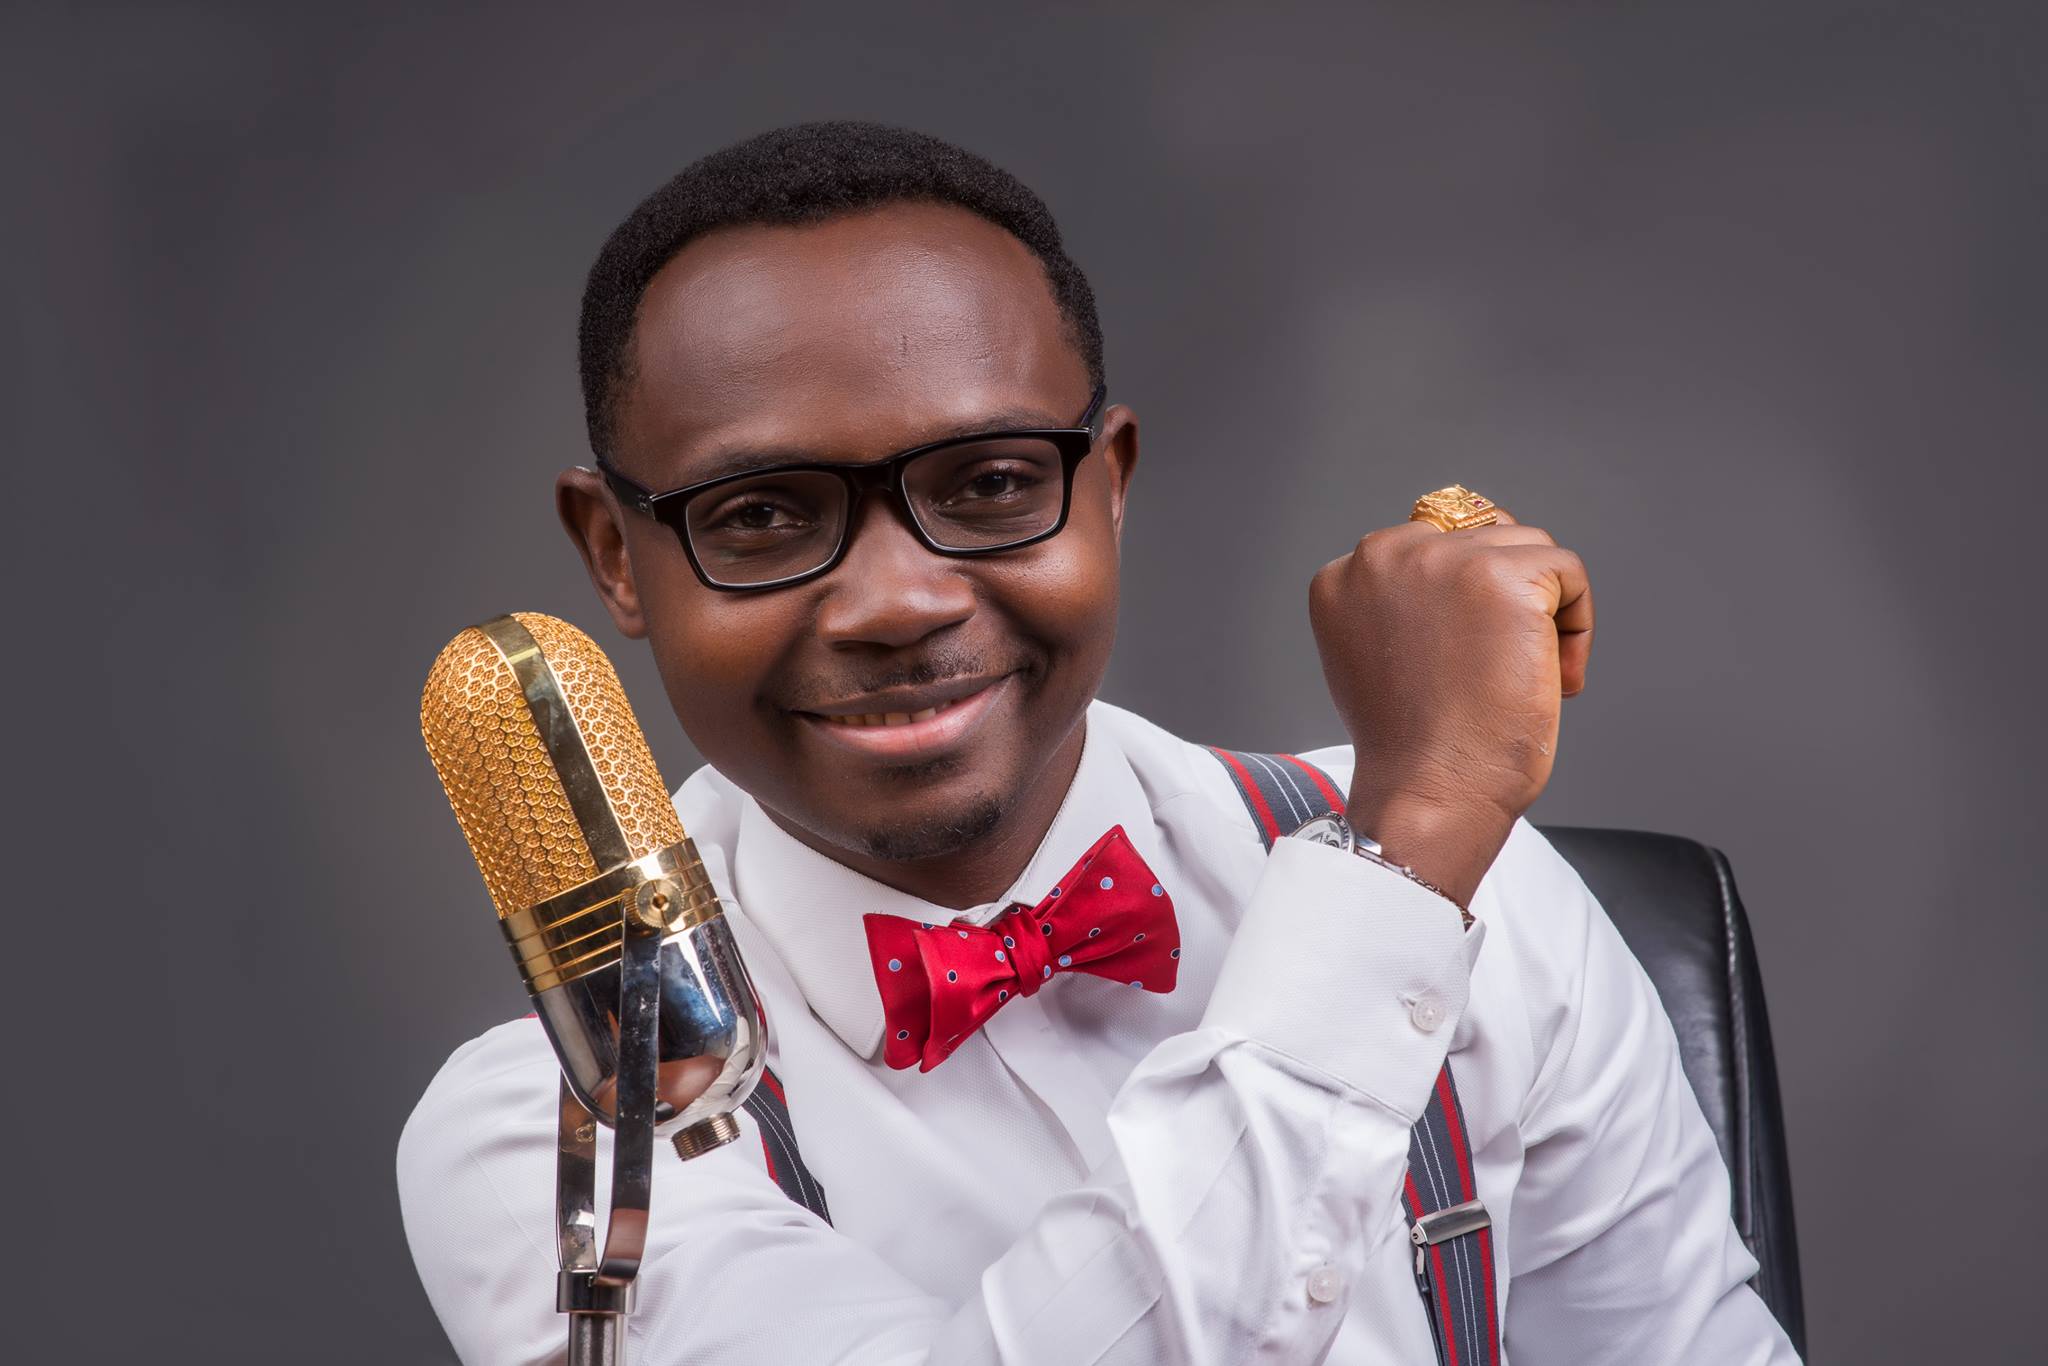 Teju Babyface speaks on relationship with Mercy Aigbe, reveals that he used to "toast" her